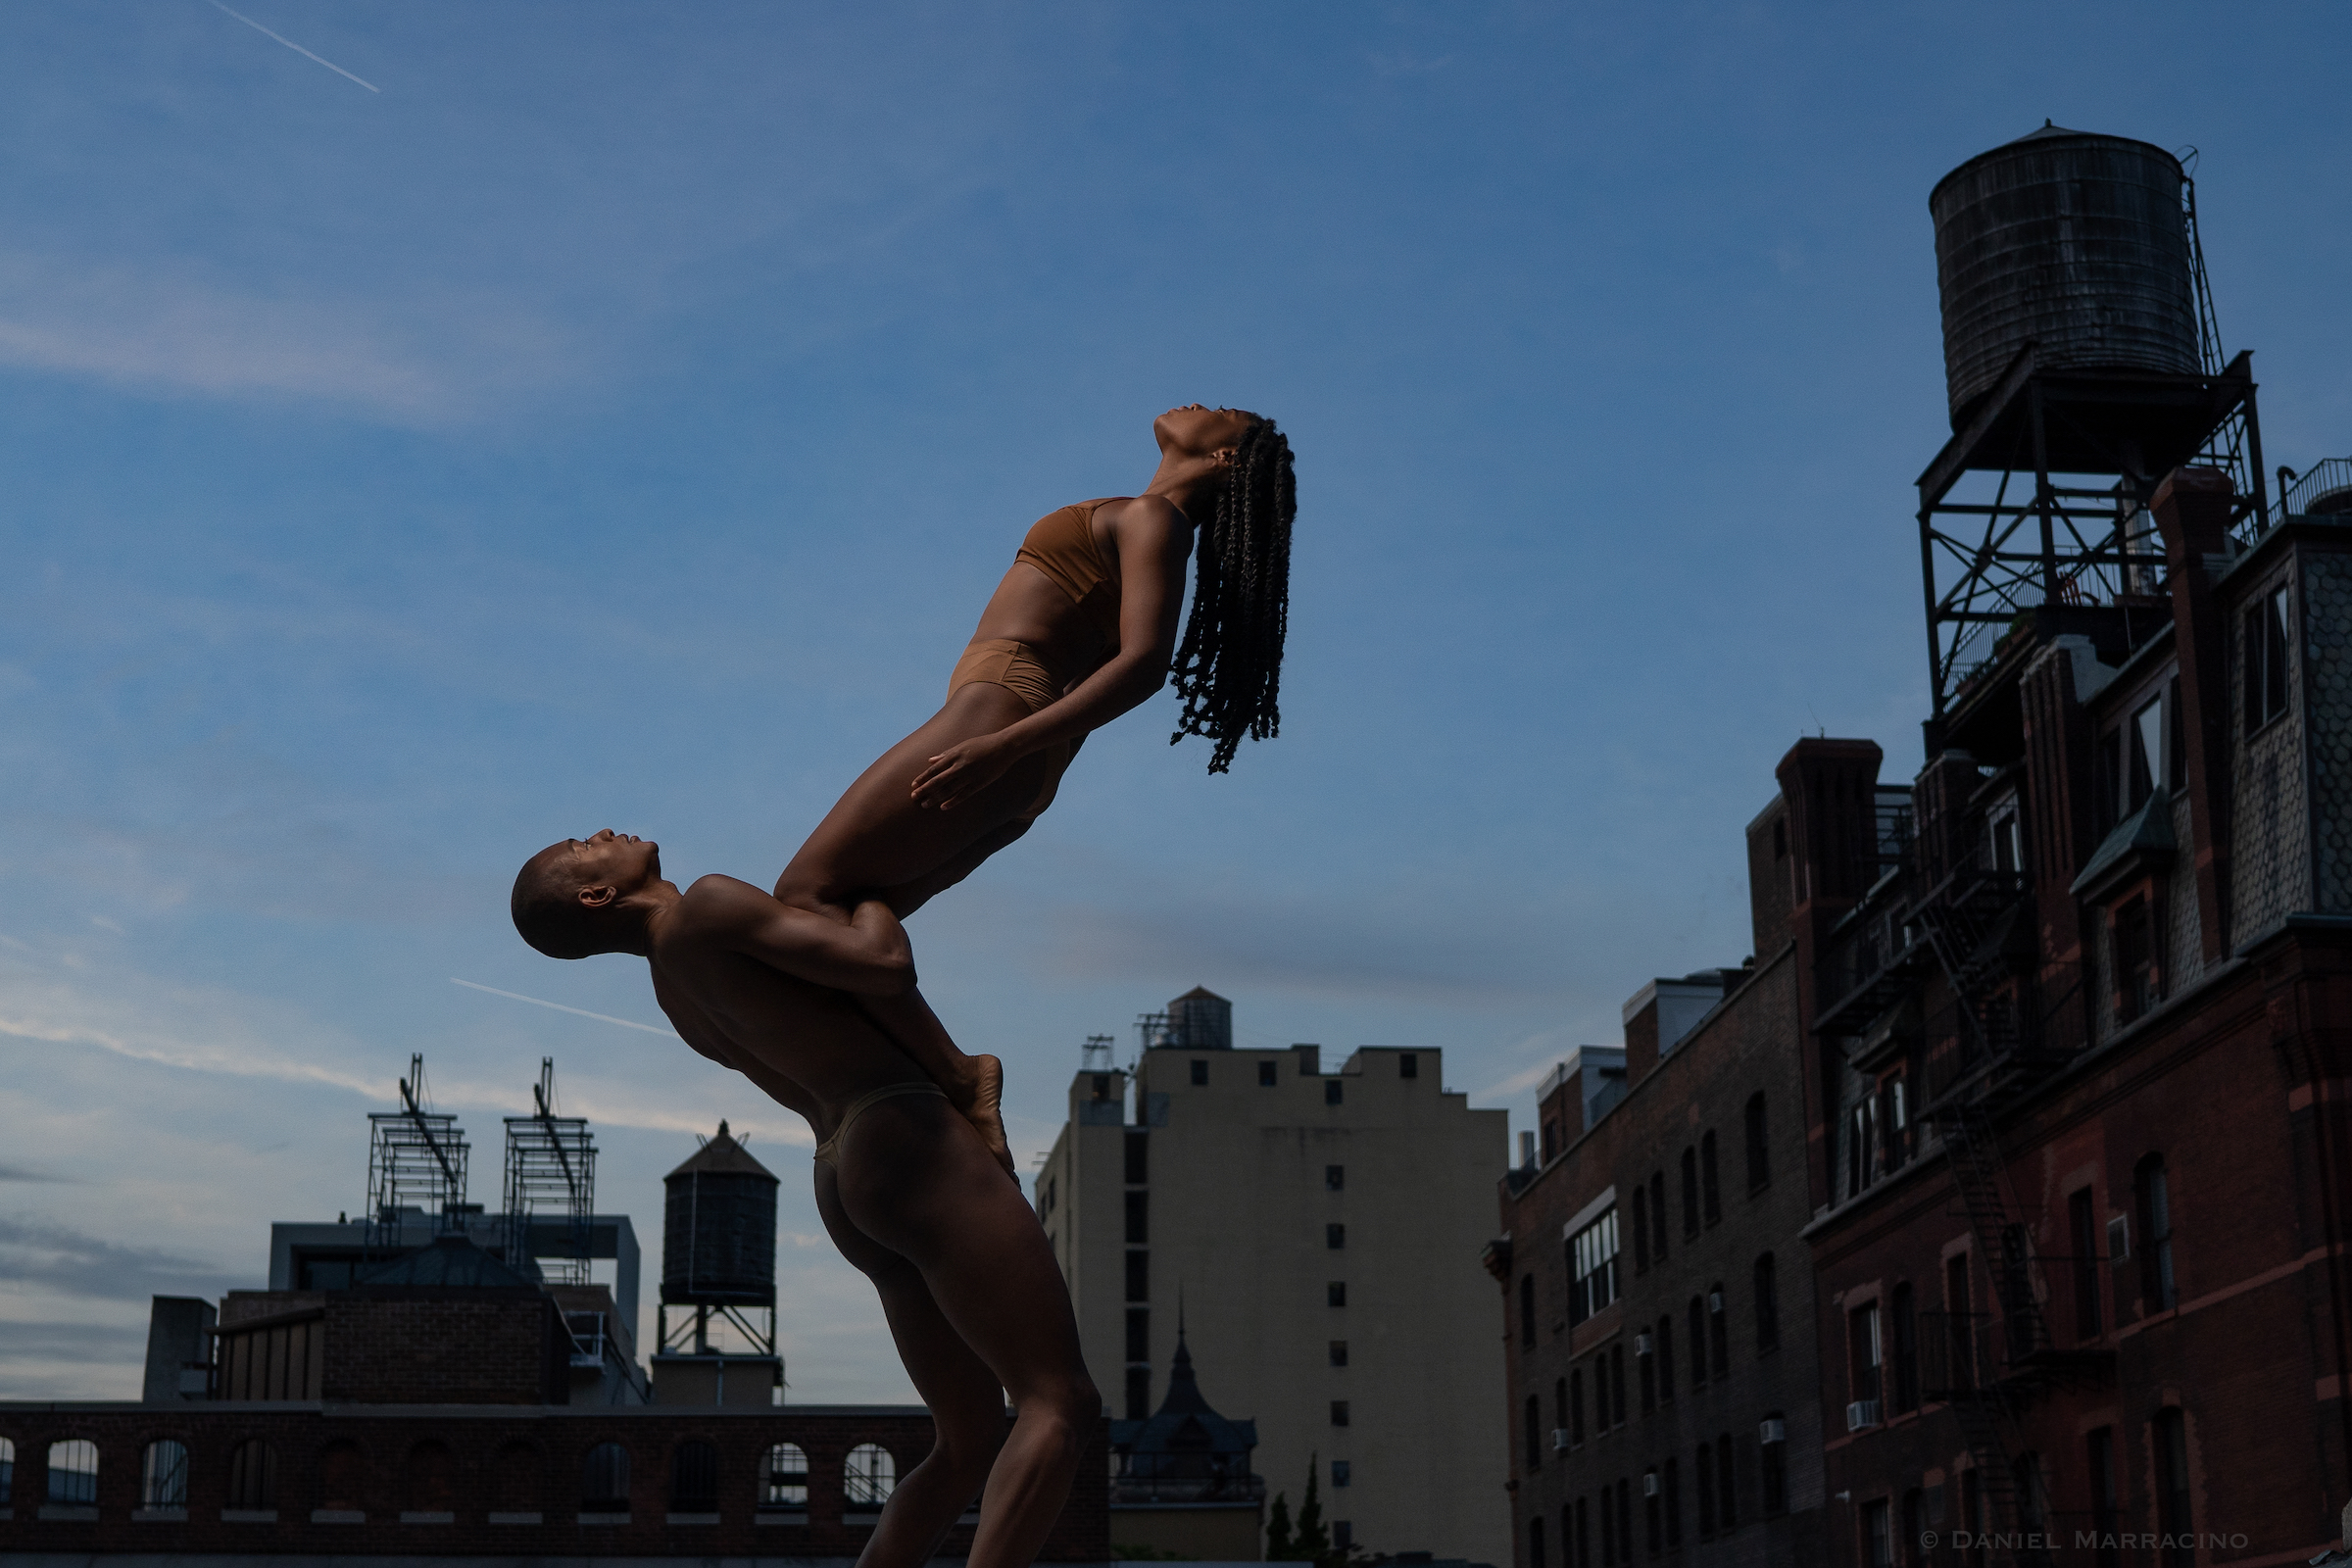 Gaspard&amp;Dancers: A dancer balances on the chest of another dancer on a rooftop in NYC. Photo by Daniel Marracino.